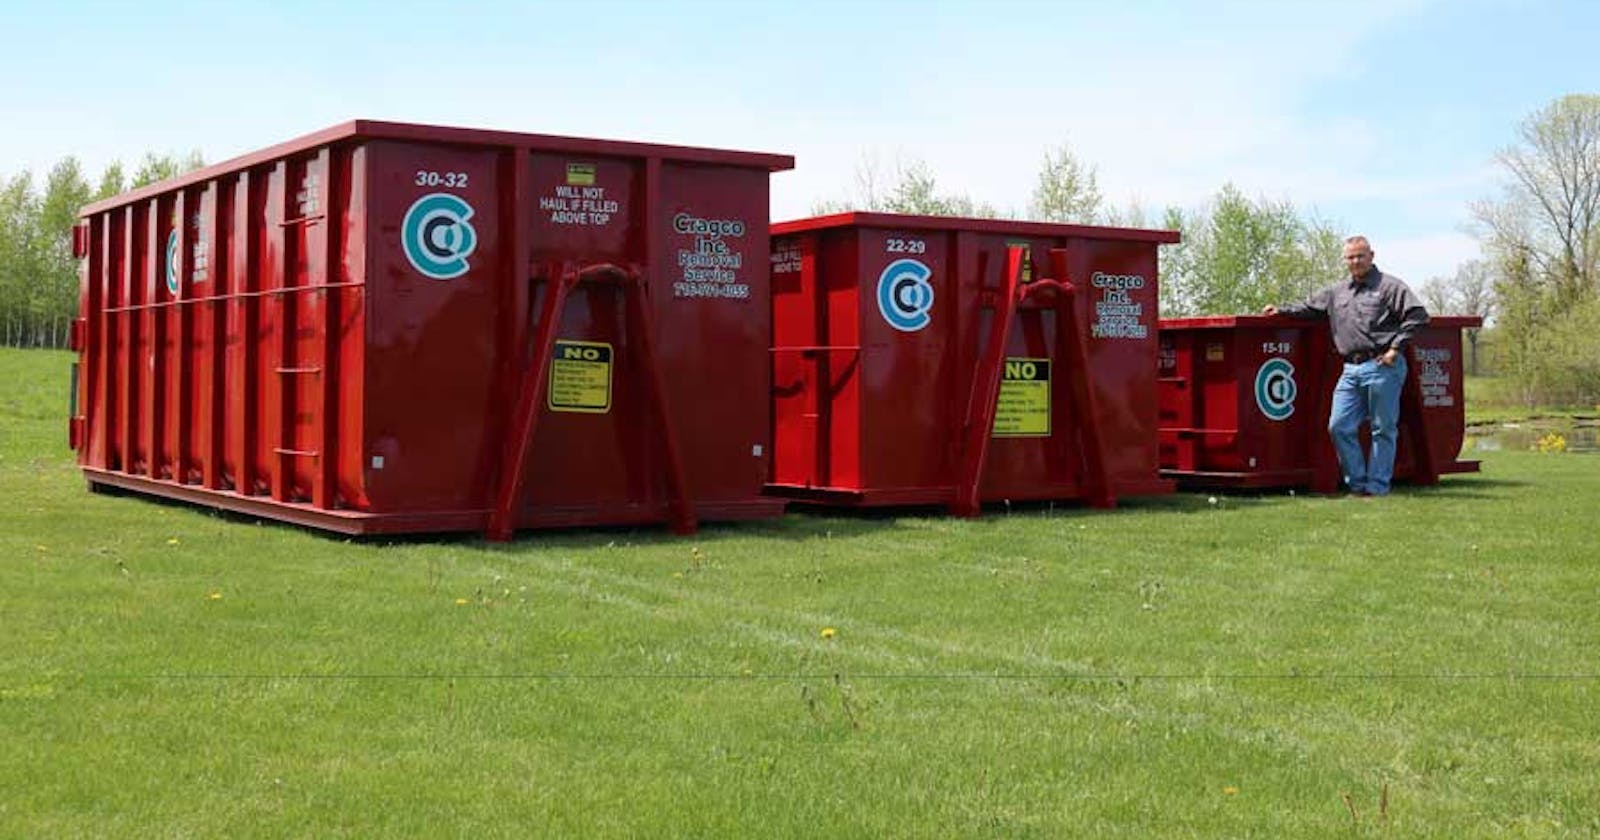 Dumpster Rental: An Excellent Solution For The Cleanup And Removal Of Unwanted Items